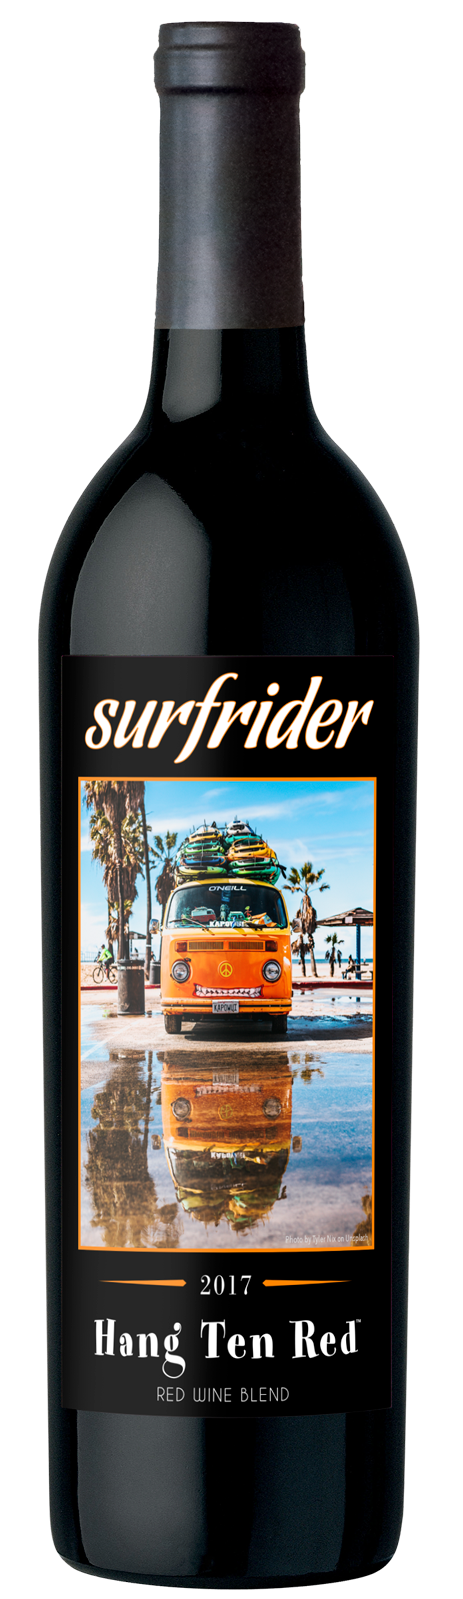 Product Image for 2017 Surfrider "Hang Ten" Red